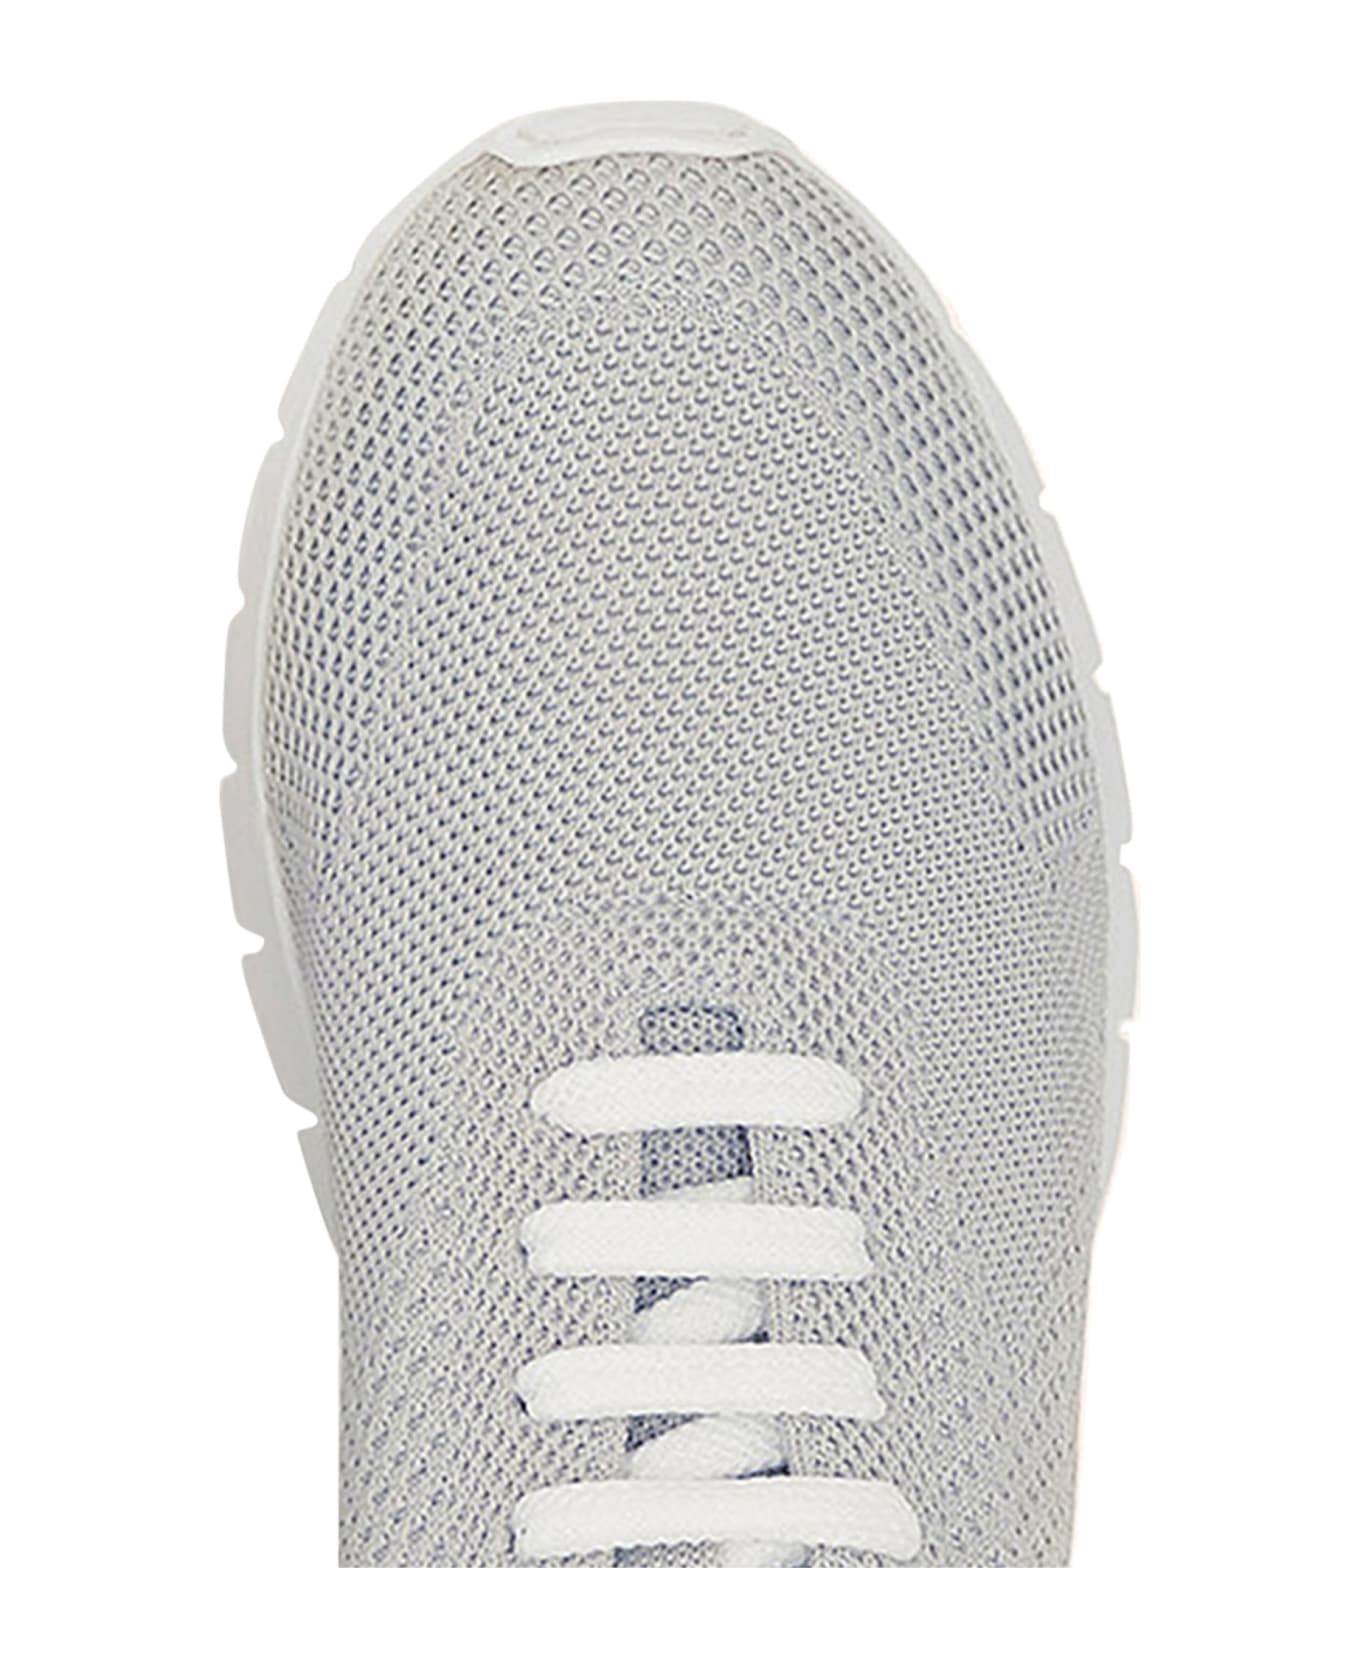 Kiton Fits - Sneakers Shoes Cotton - ICE